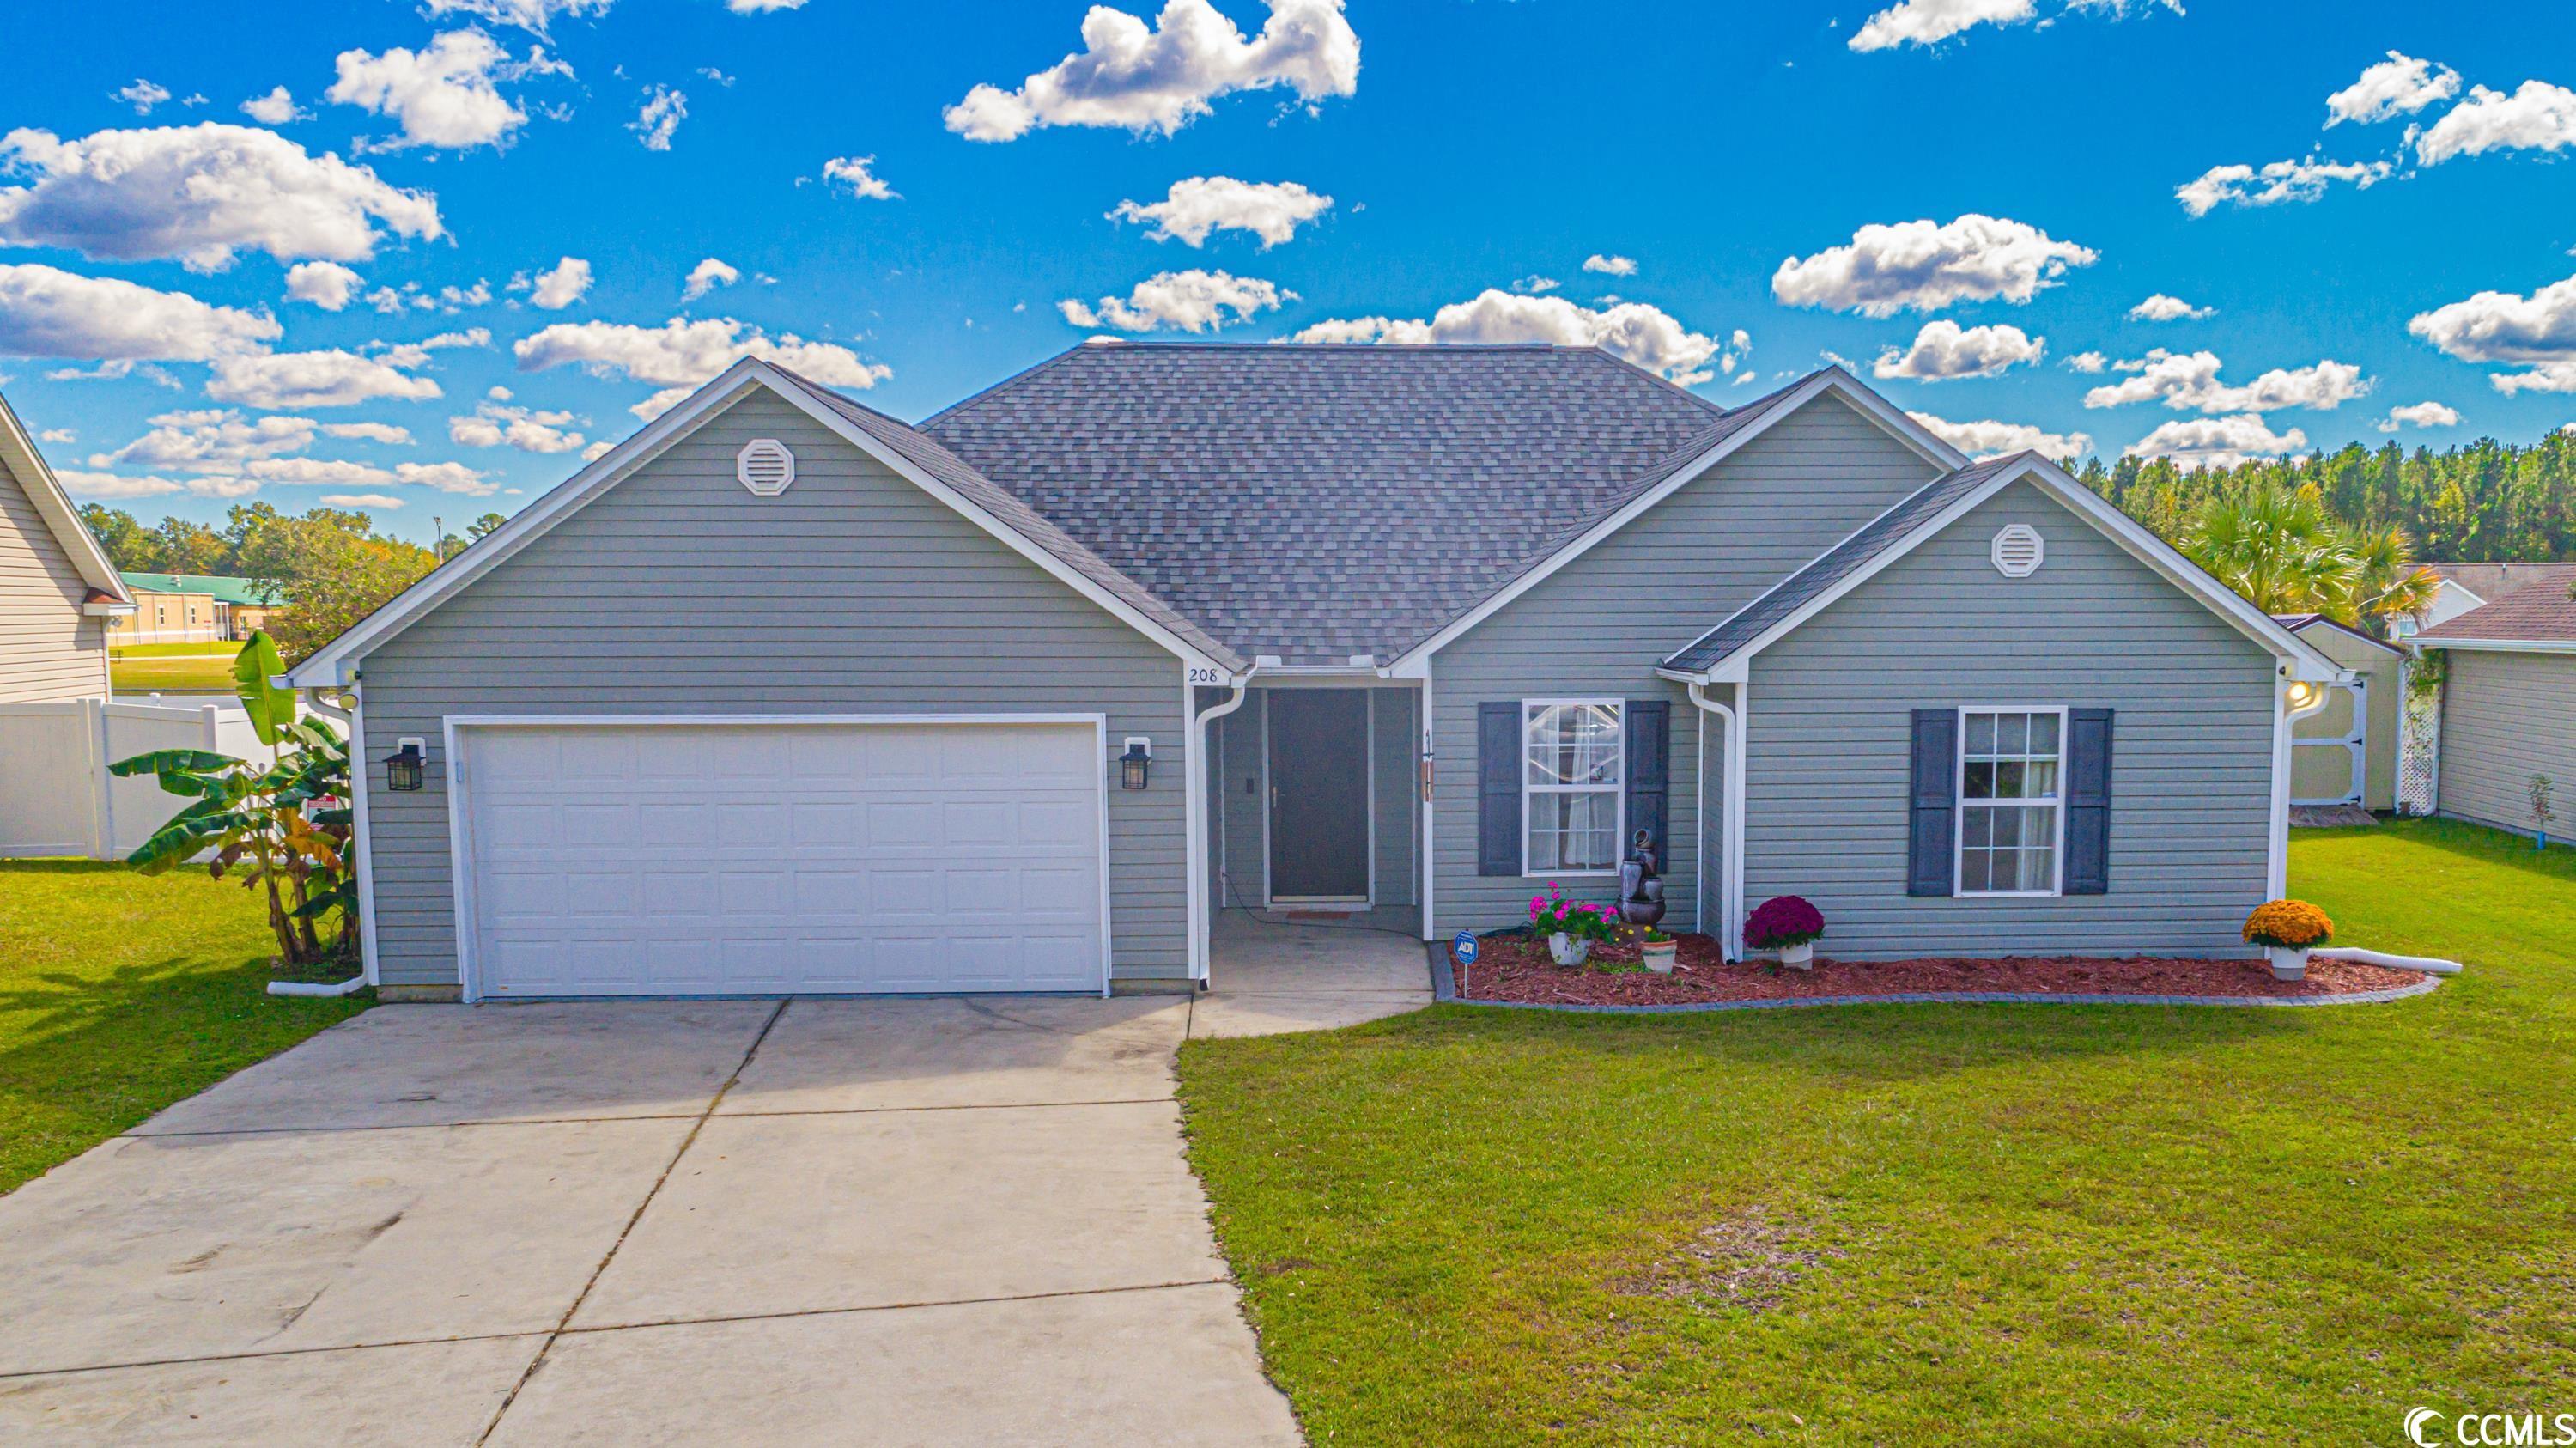 Photo one of 208 Hickory Springs Ct. Conway SC 29527 | MLS 2321319